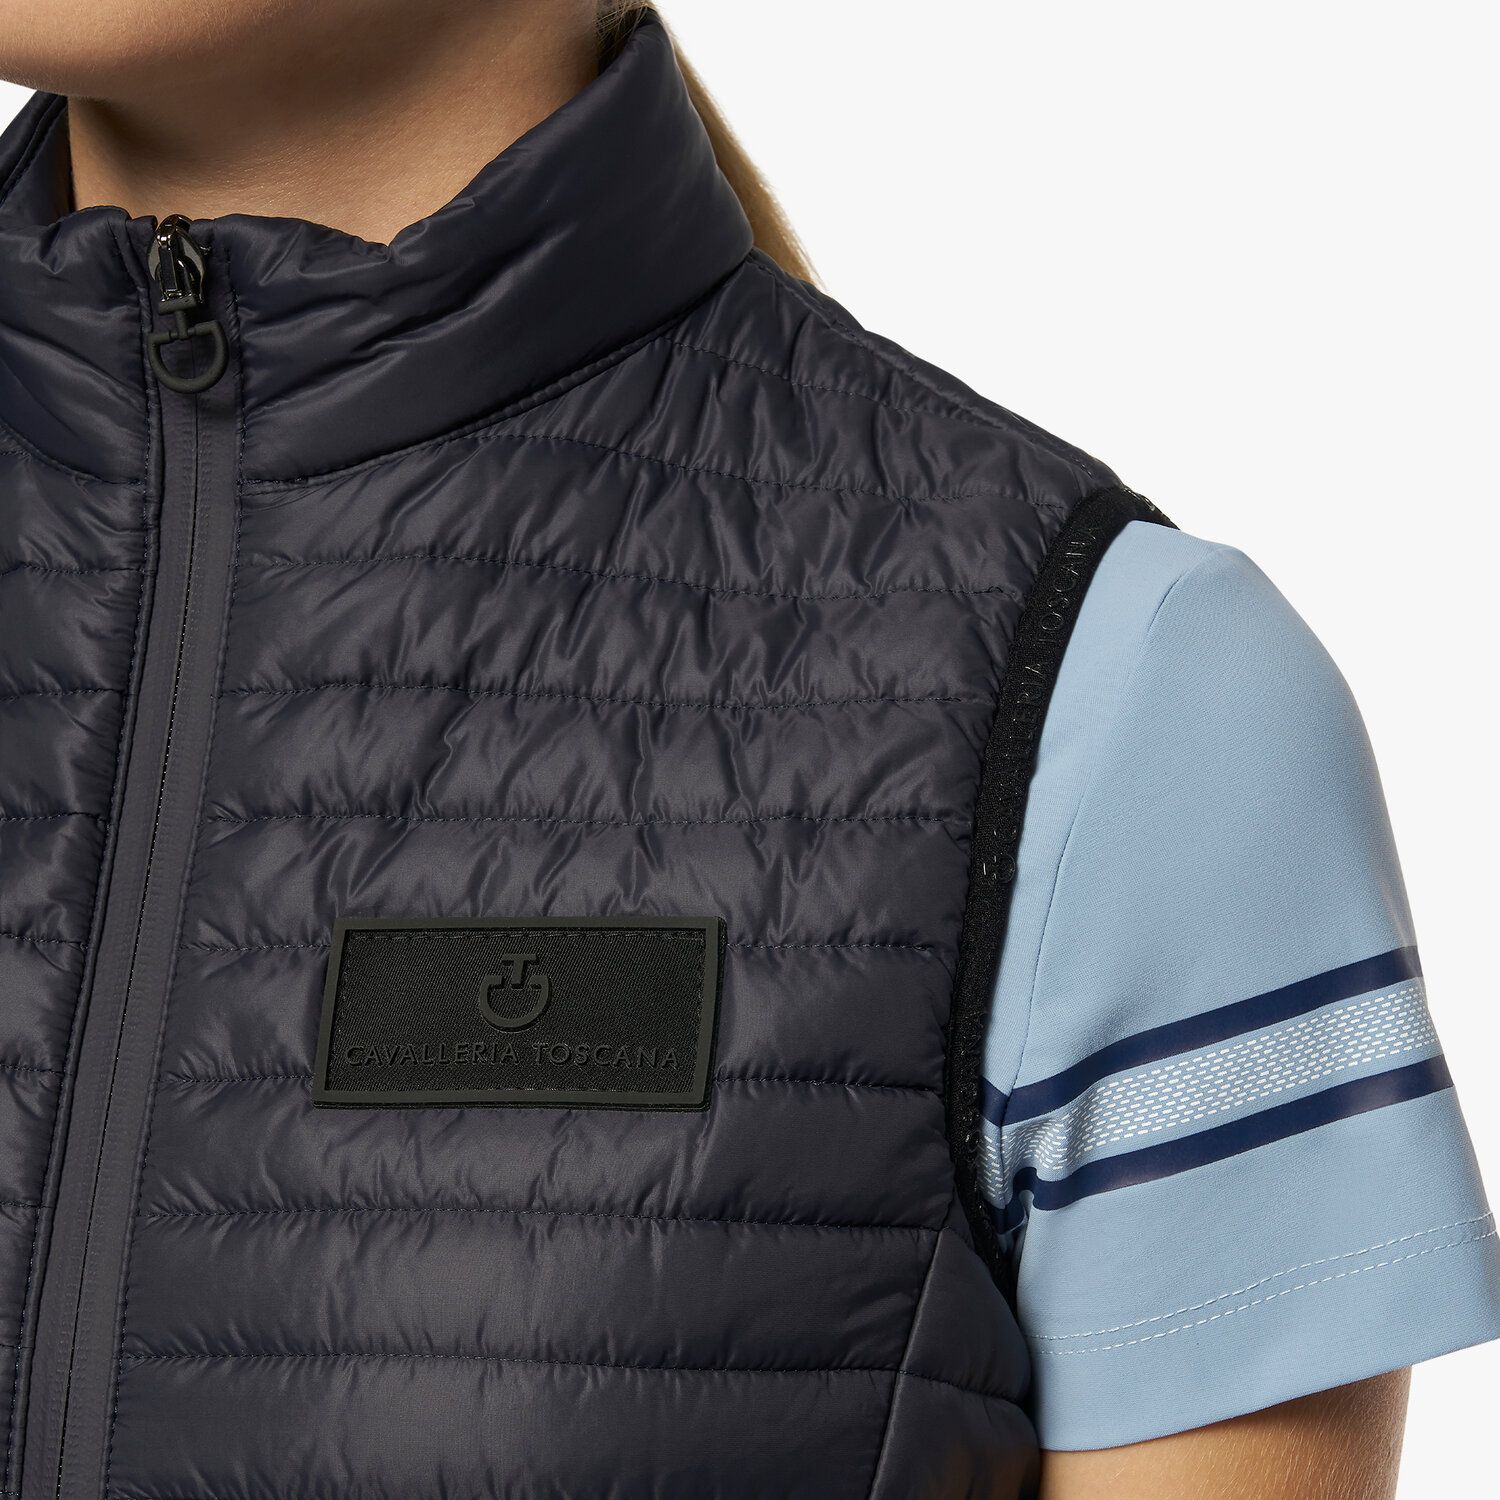    Jersey Quilted w/ Nylon Inser CAVALLERIA TOSCANA ()